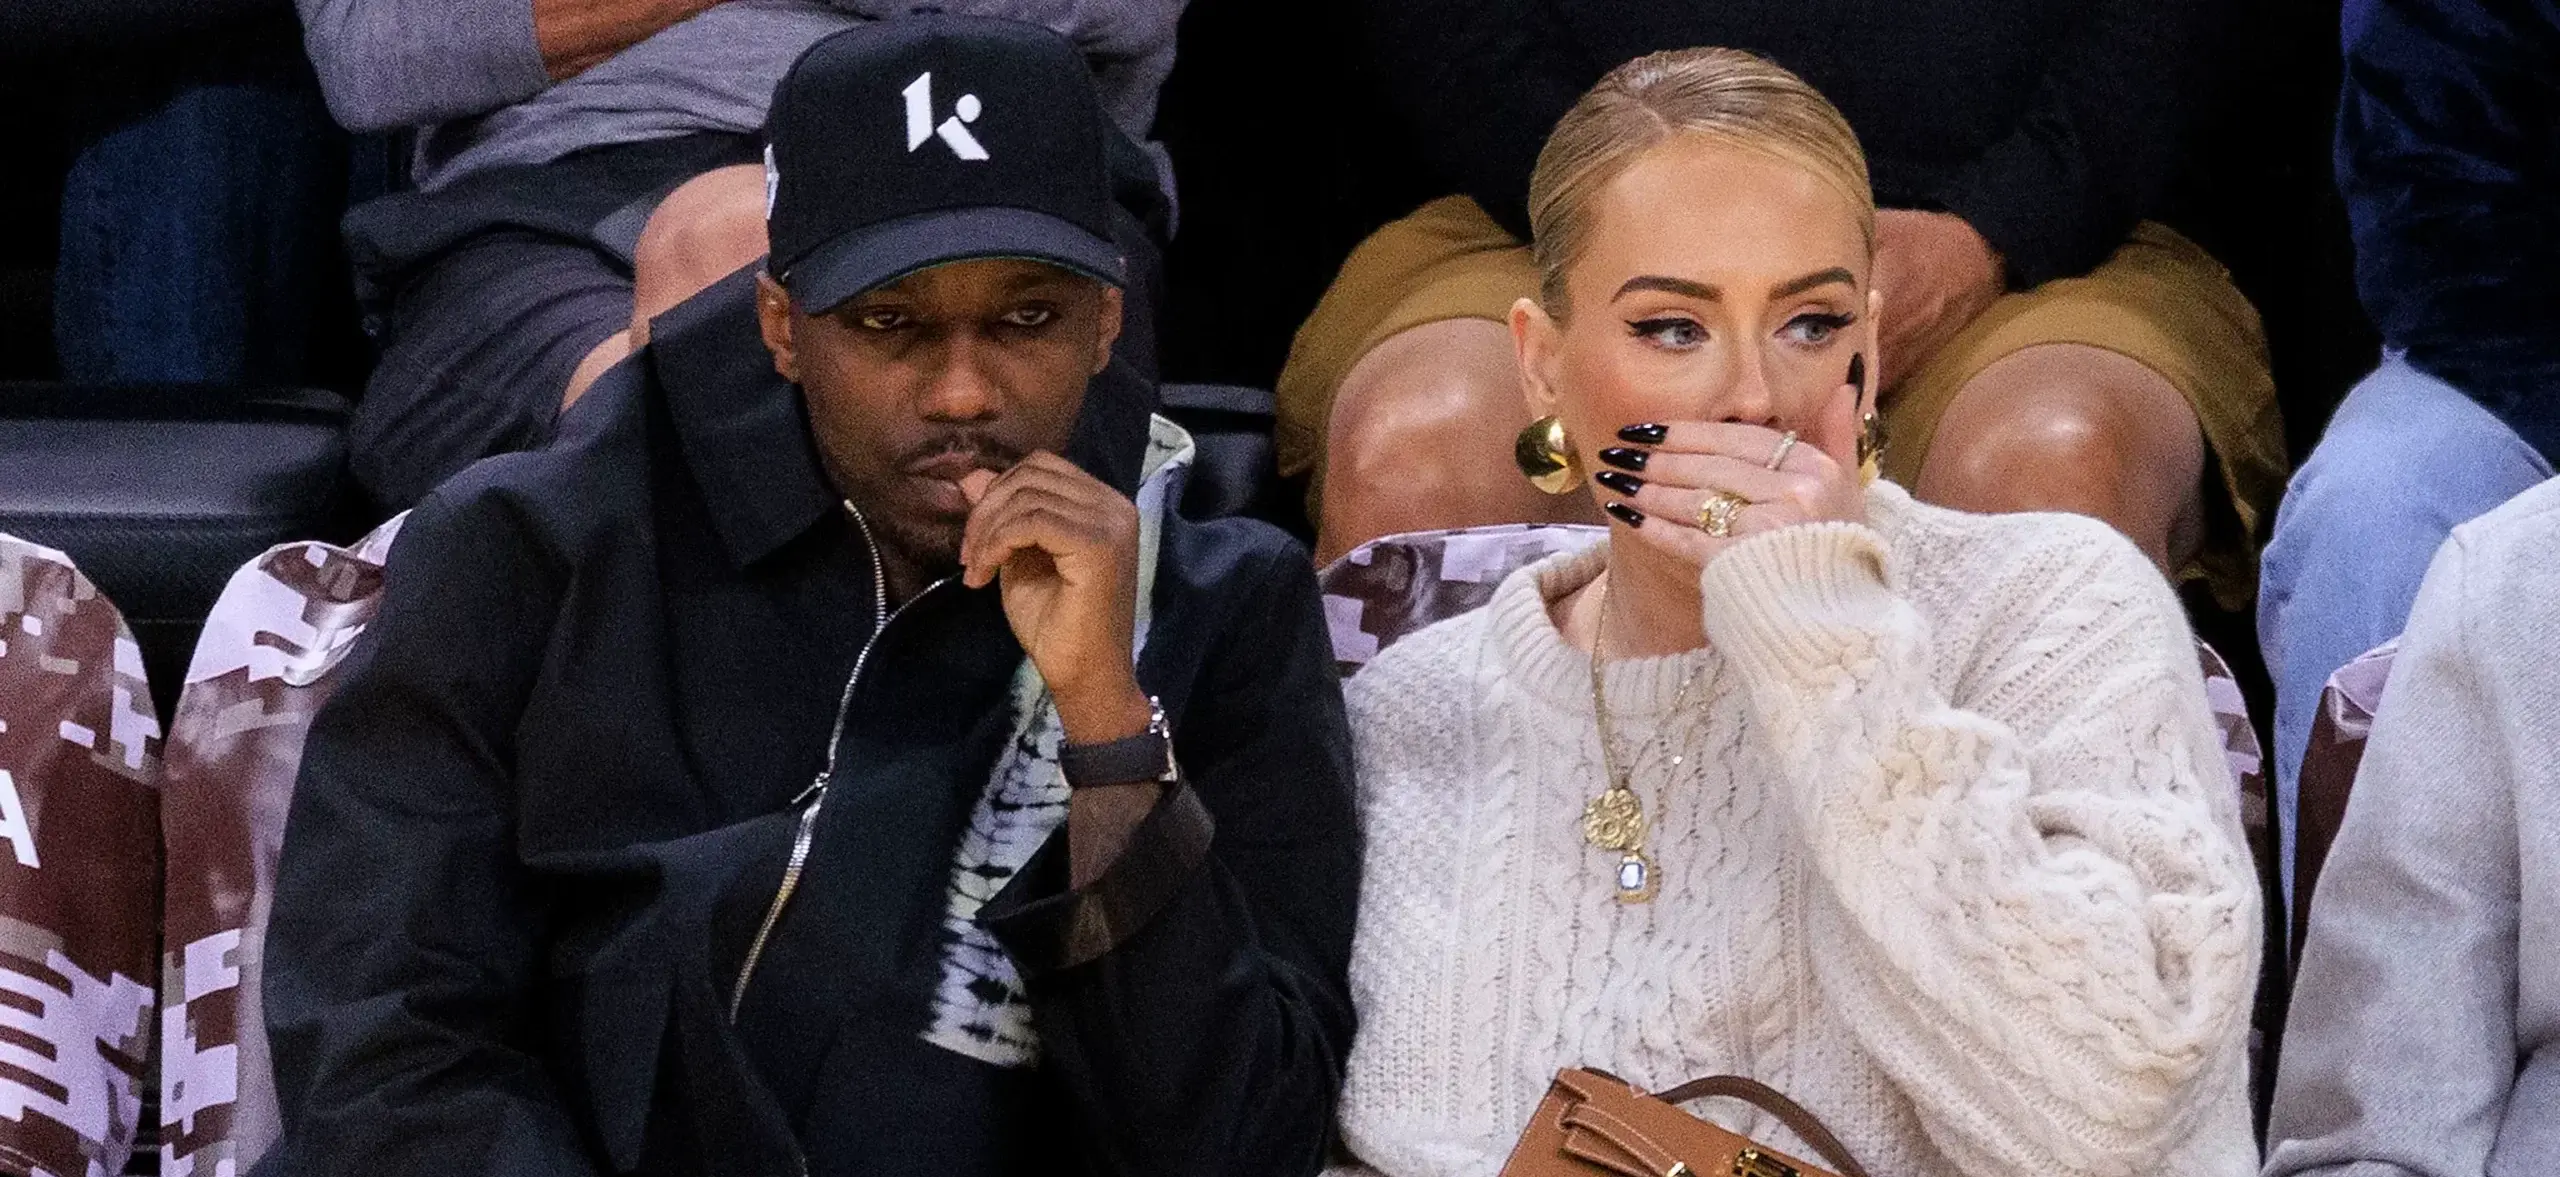 Adele’s Relationship With Rich Paul Reportedly ‘Solid’ As She Marks Her 36th Birthday